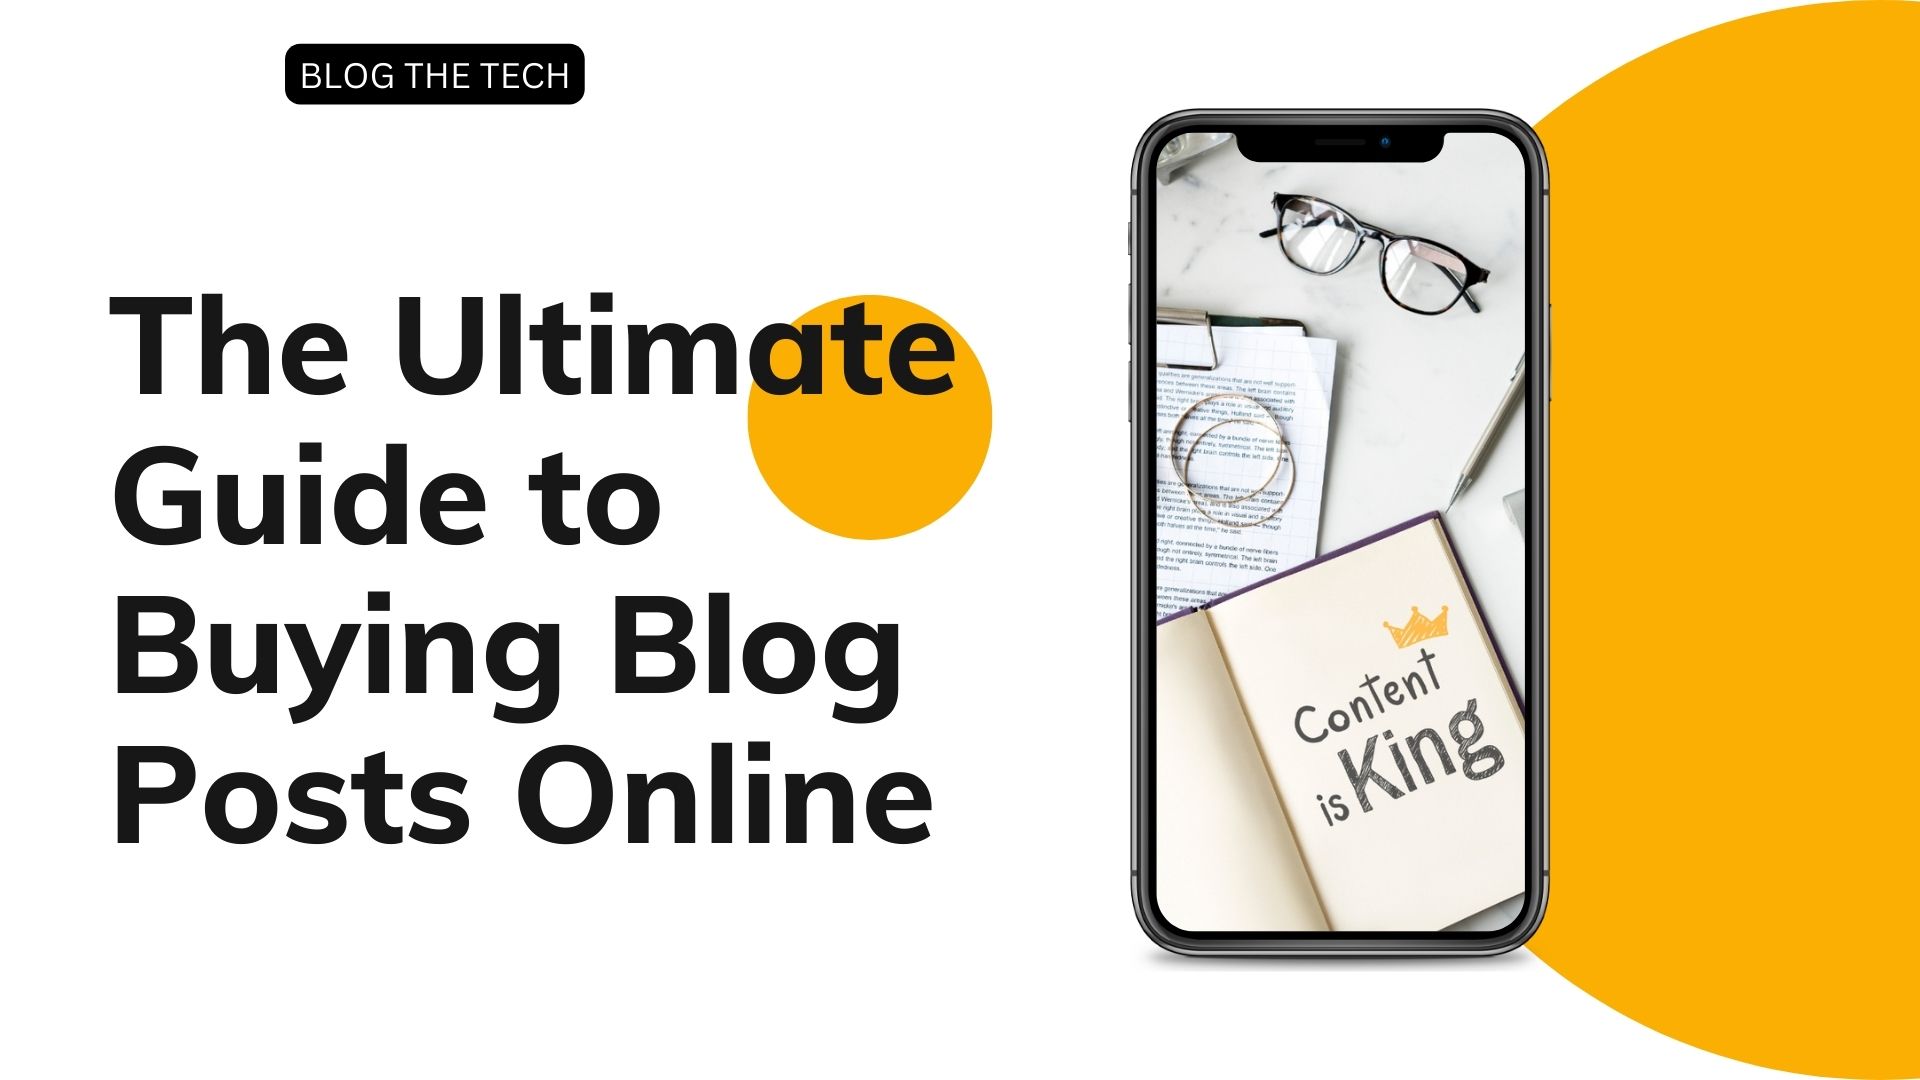 The Ultimate Guide to Buying Blog Posts Online